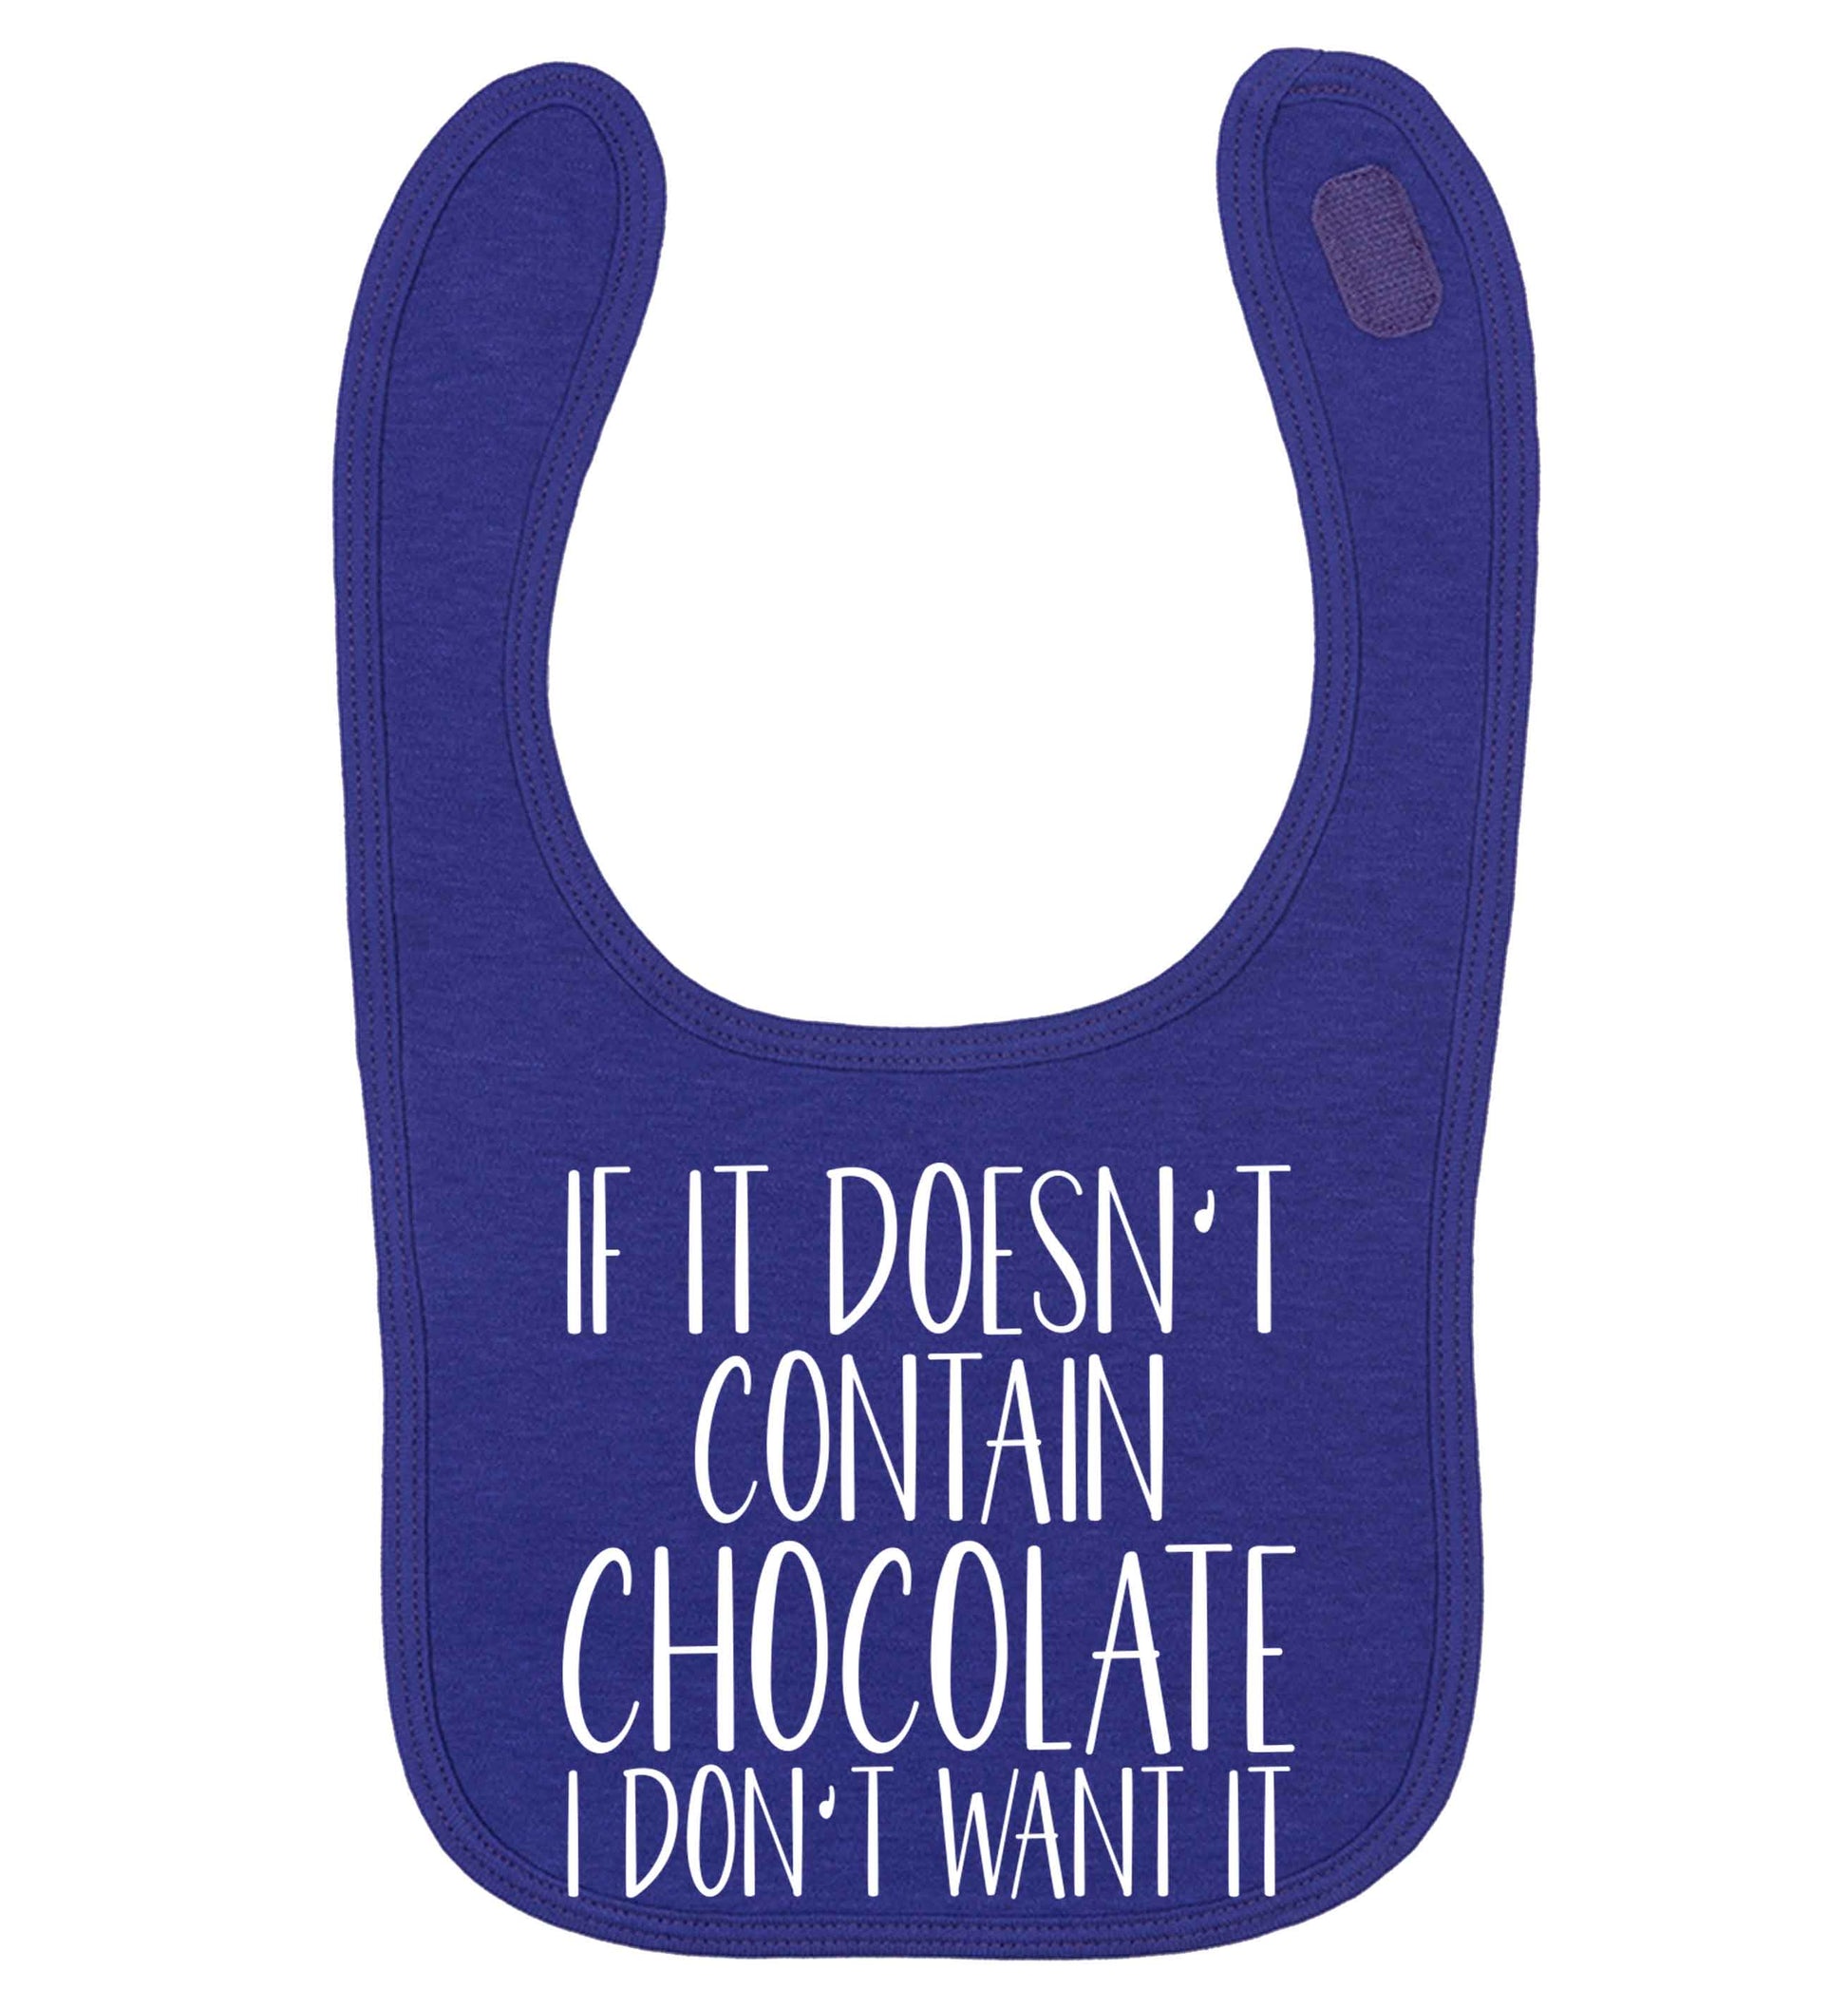 If it doesn't contain chocolate I don't want it | baby bib